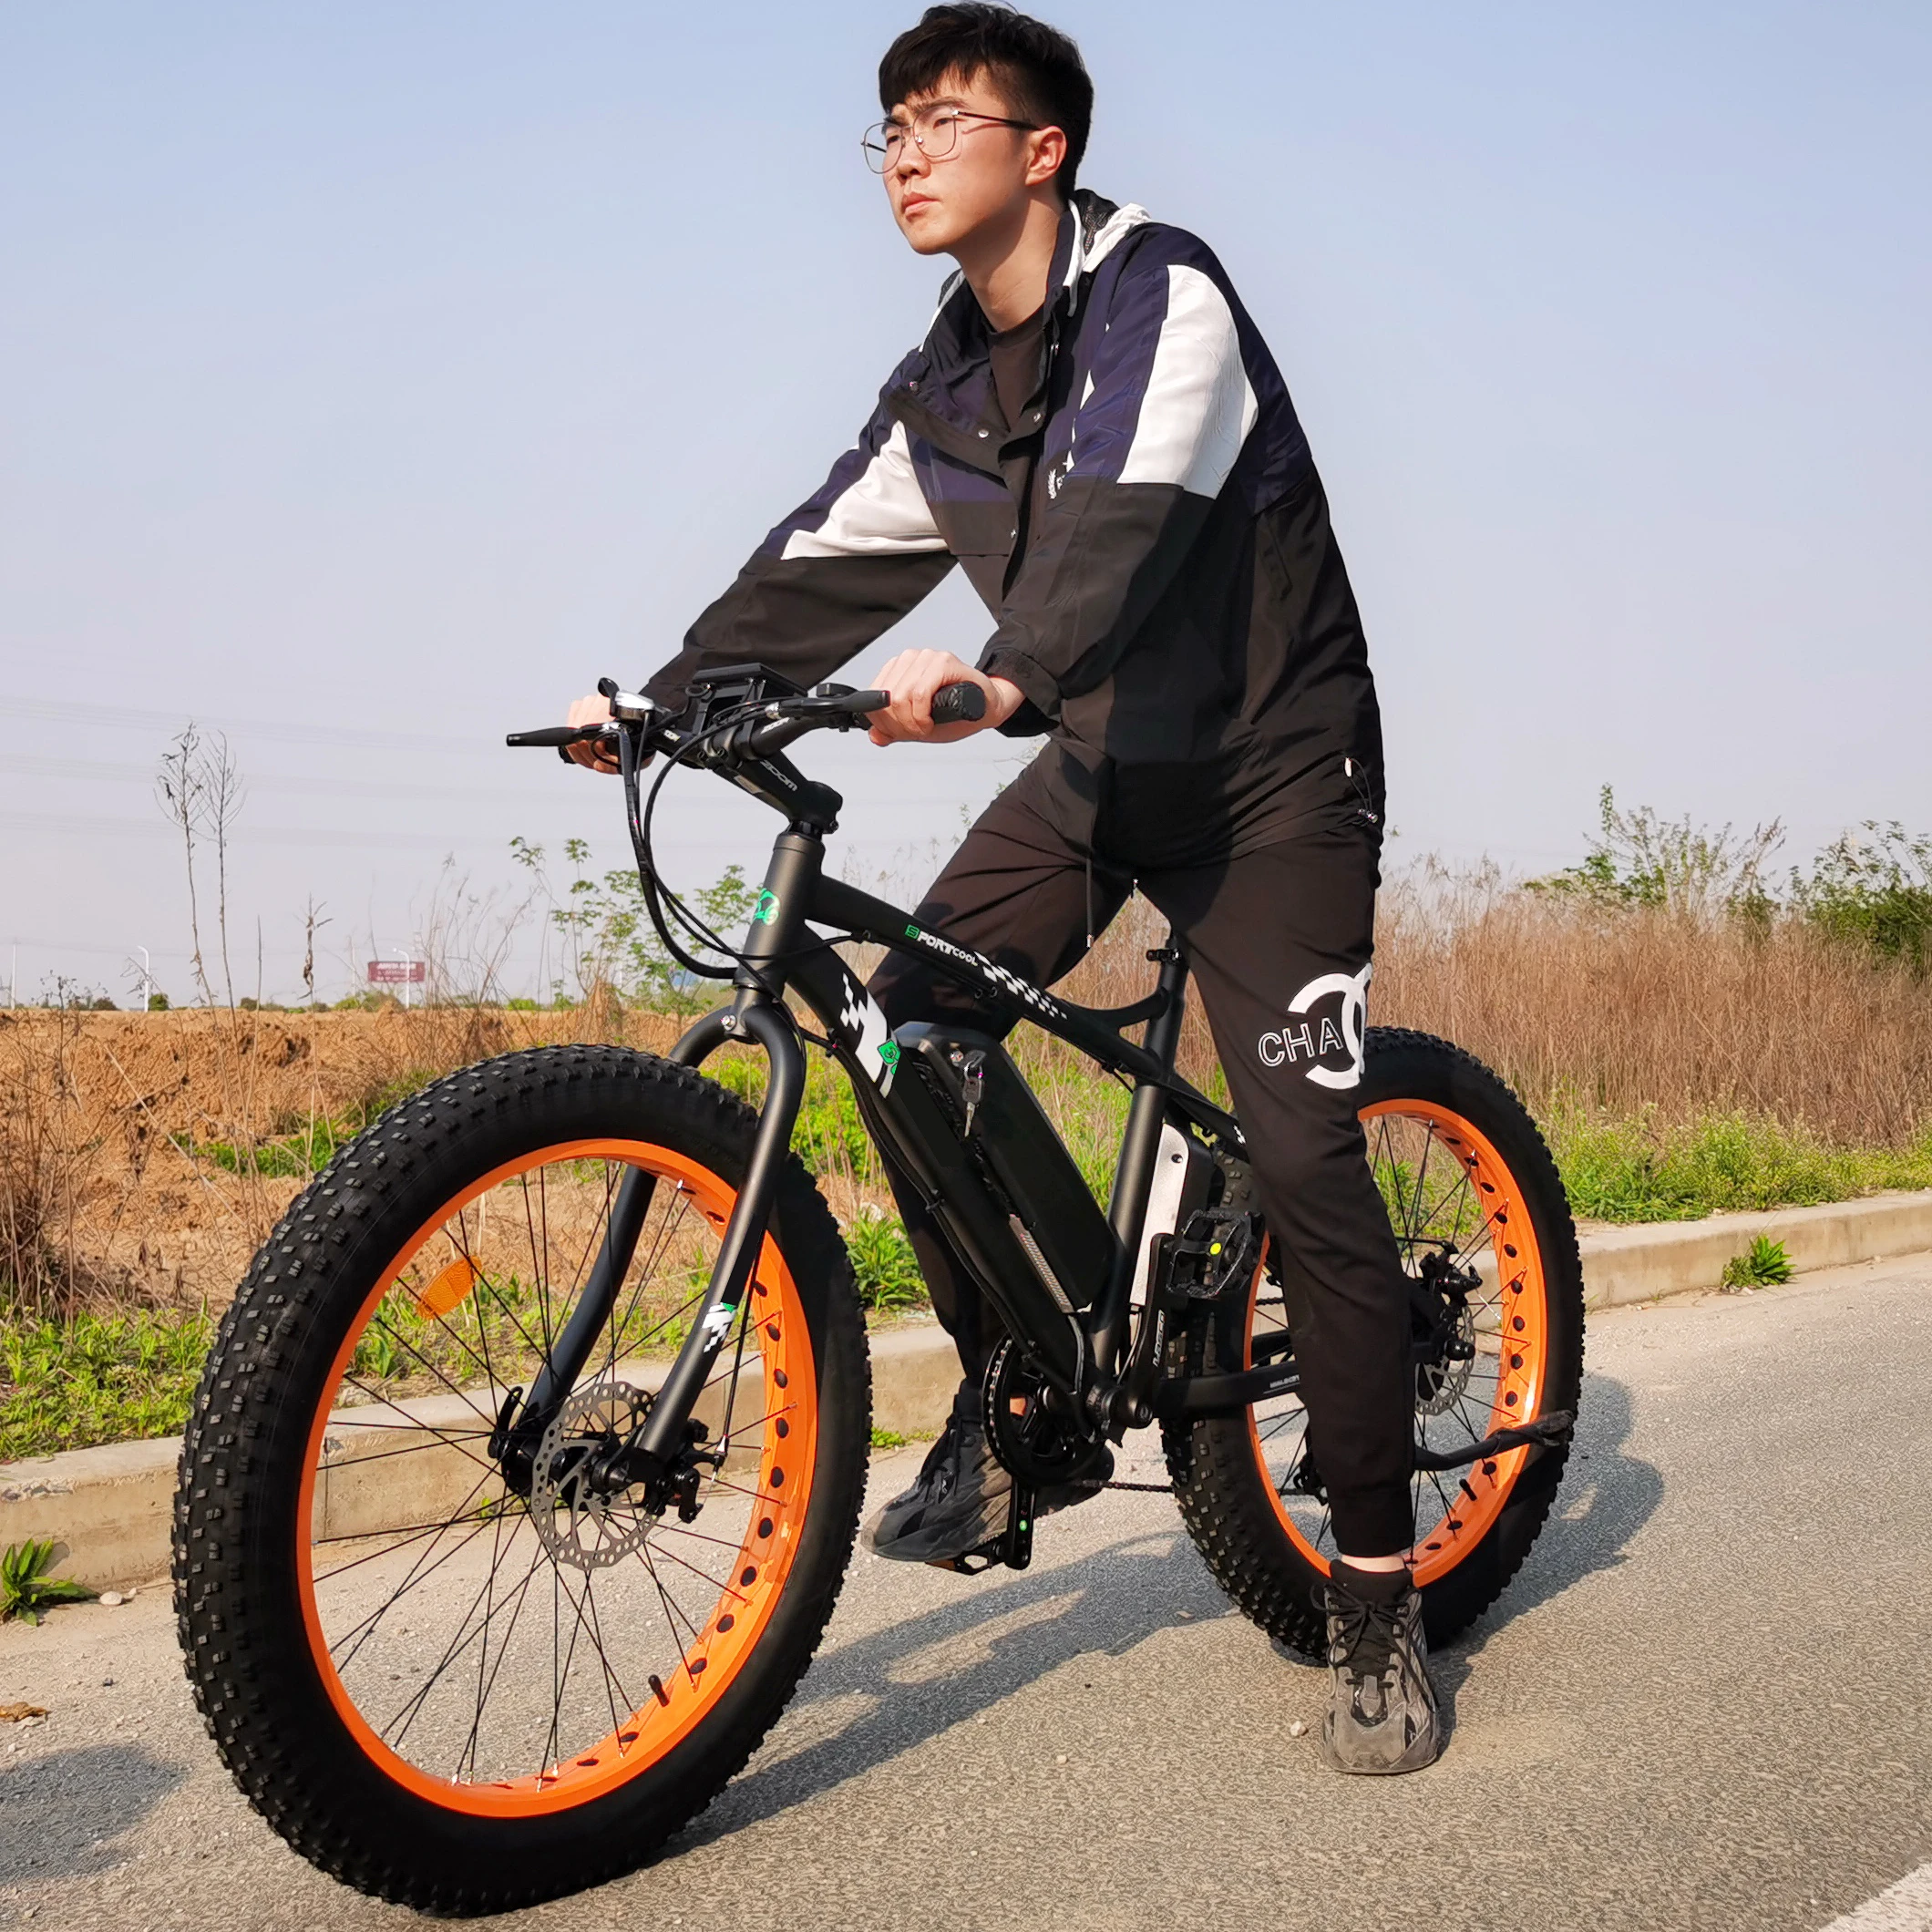 

2020 hot sale powerful offroad fat tire electric mountain bike ebike 500w with low price